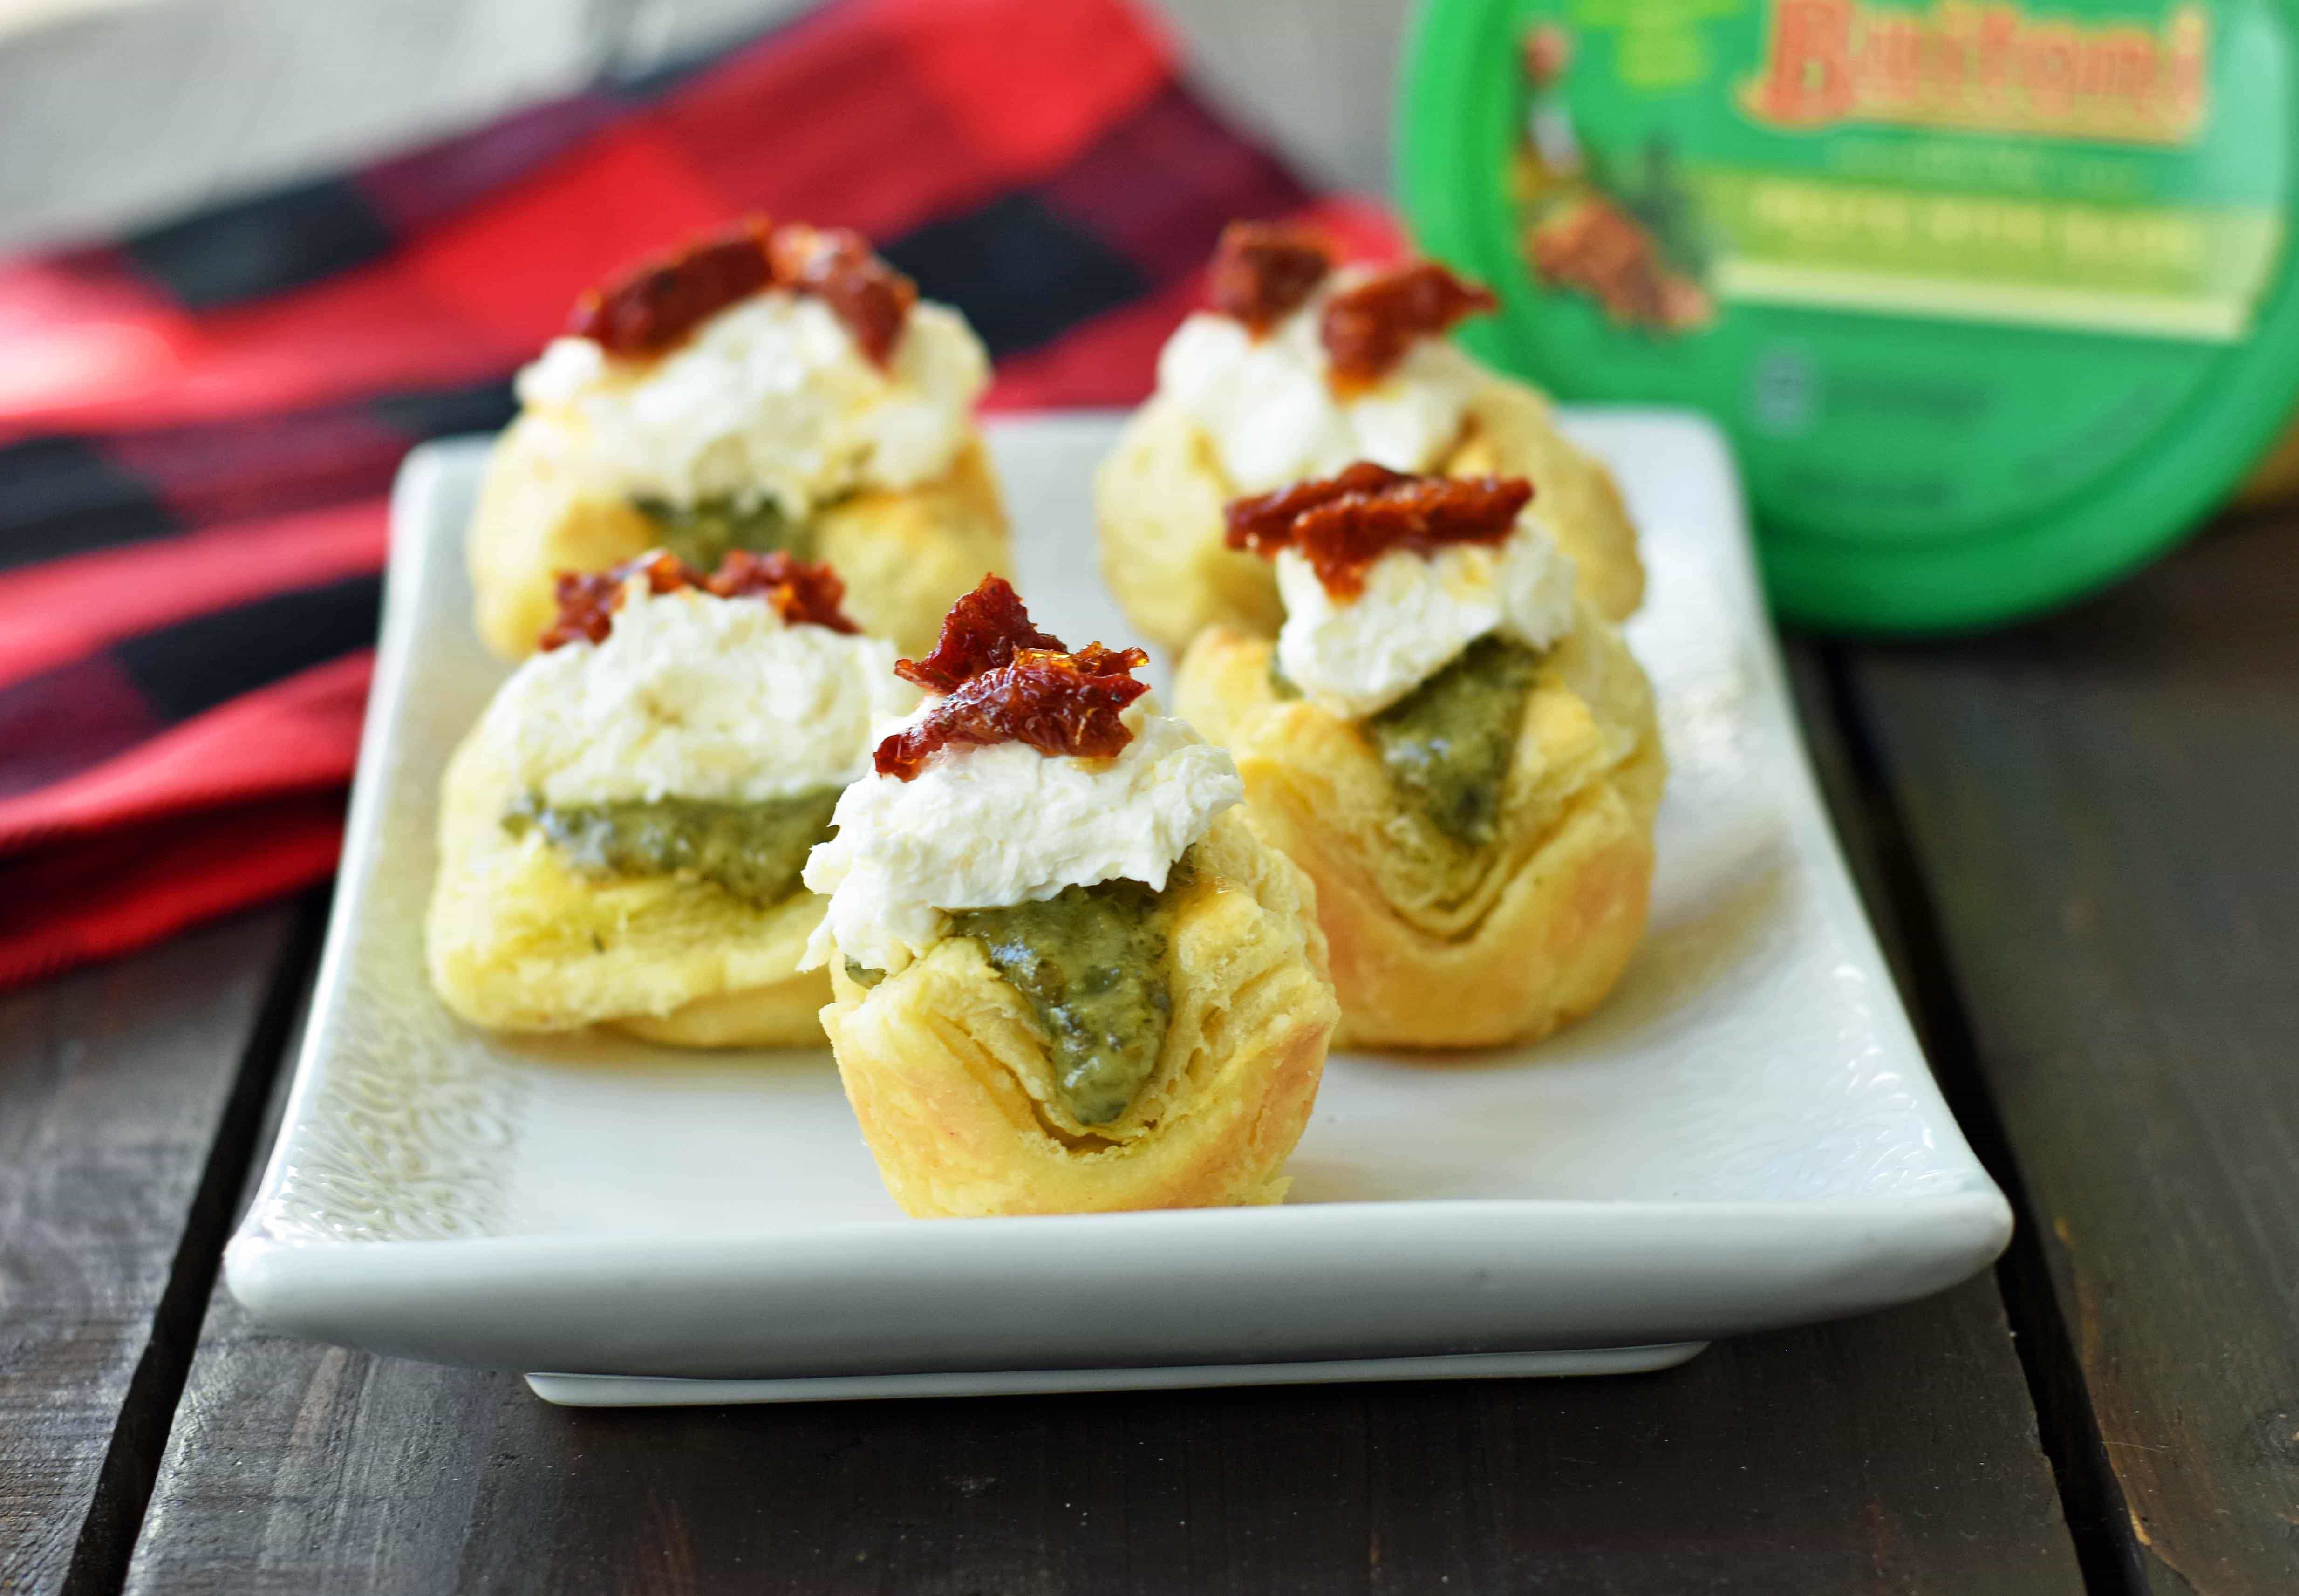 Pesto Parmesan Sundried Tomato Tartlets are made with flaky puff pastry baked until golden brown and filled with Buitoni freshly made pesto sauce, a parmesan goat cheese cream cheese layer, and topped with sweet sundried tomatoes. A beautiful and festive holiday appetizer. www.modernhoney.com @buitoniusa #sponsored 